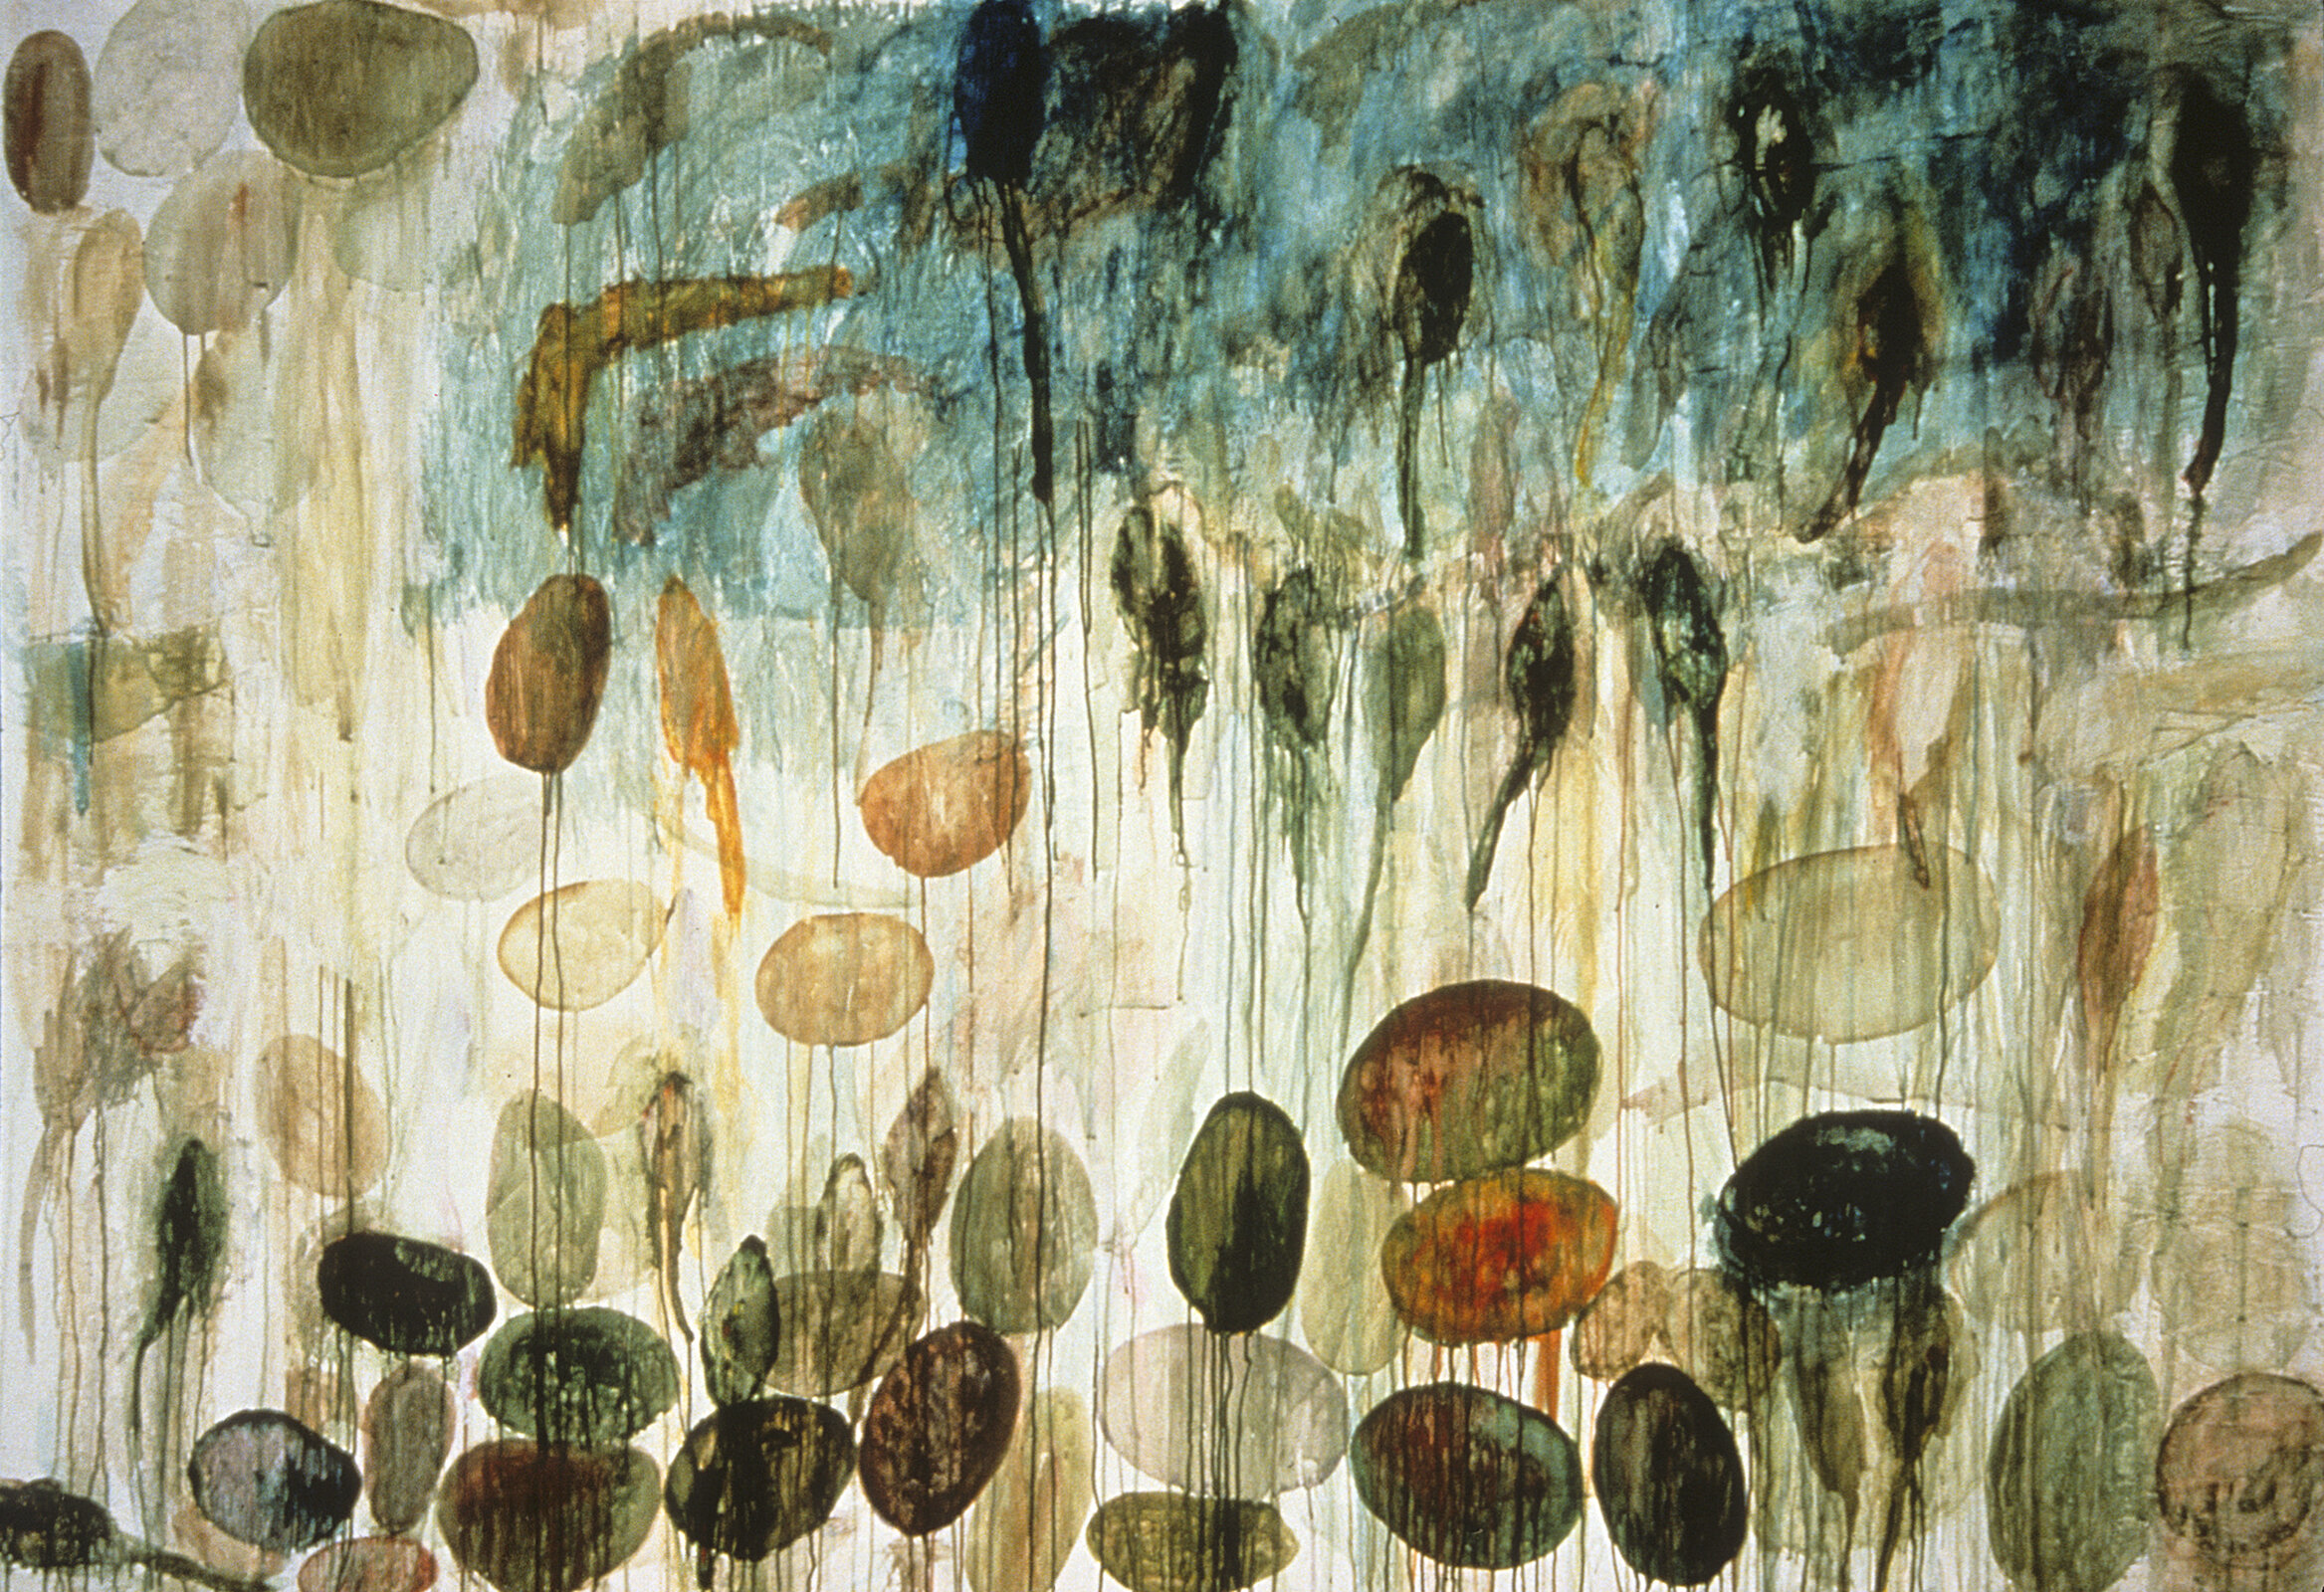   Stones, Leaves, Seeds and Water , 1989, acrylic, vellum on canvas, 63 x 84 inches 